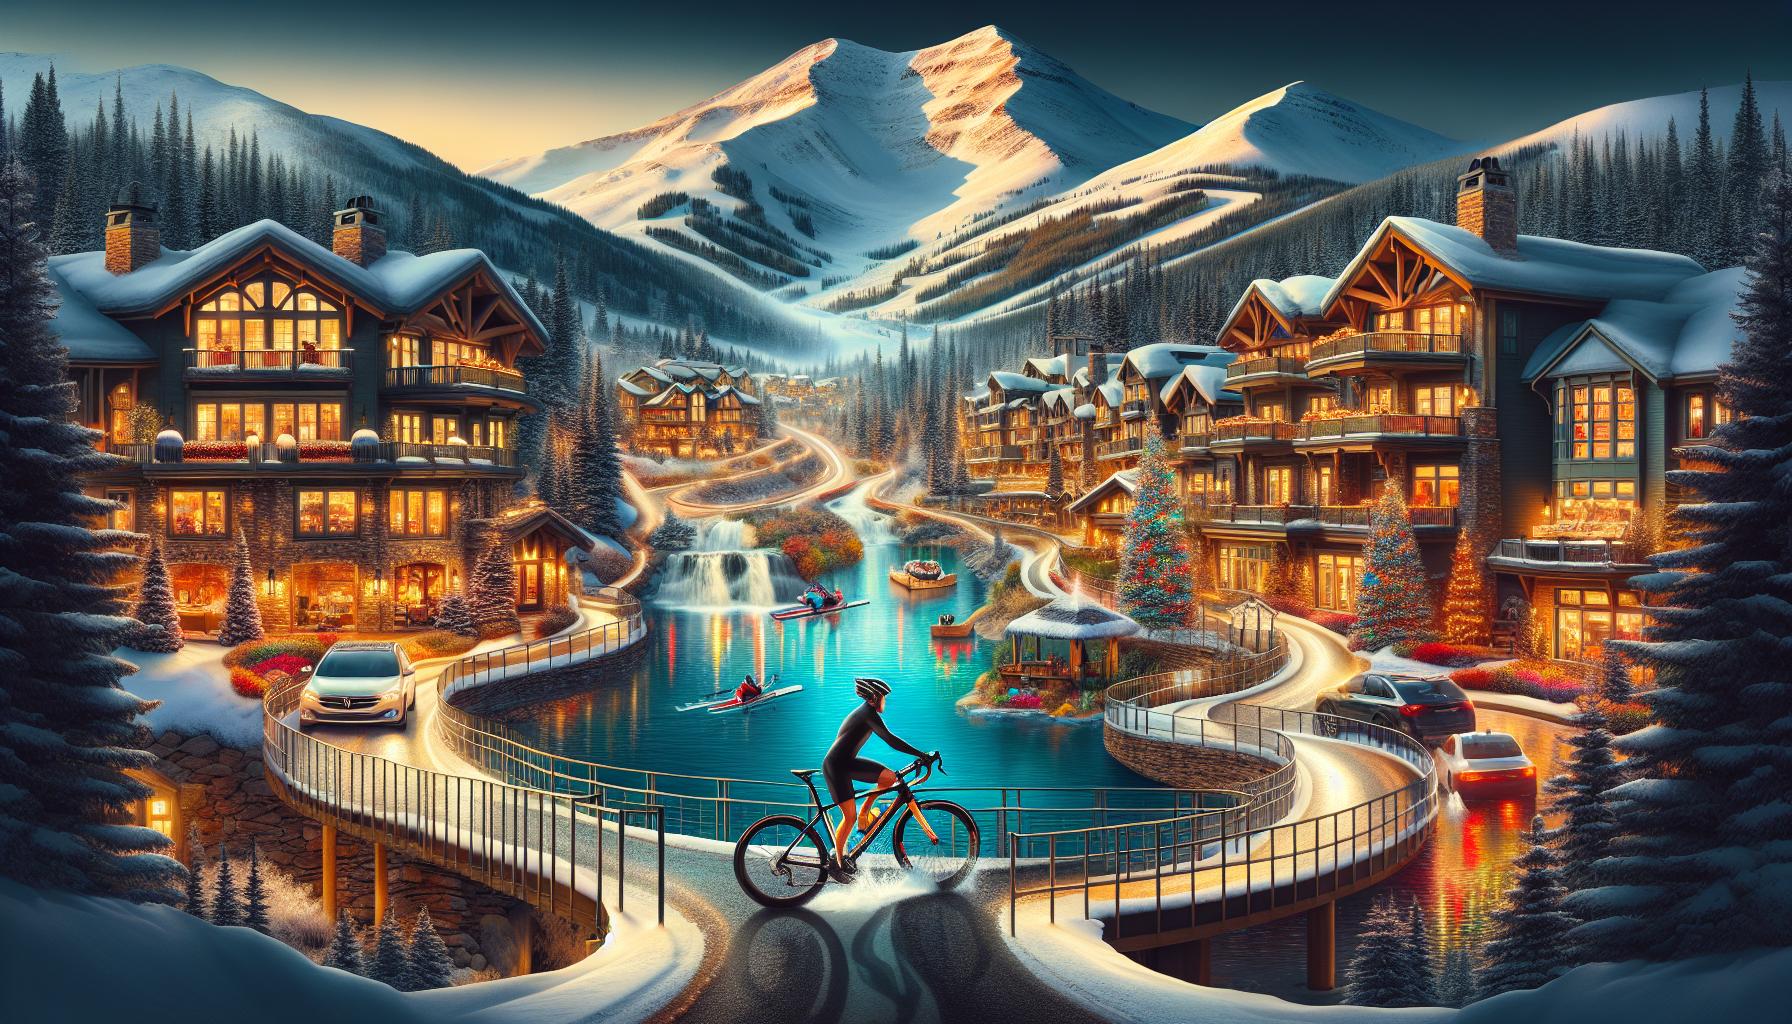 Where Can I Rent A Road Bike In Vail